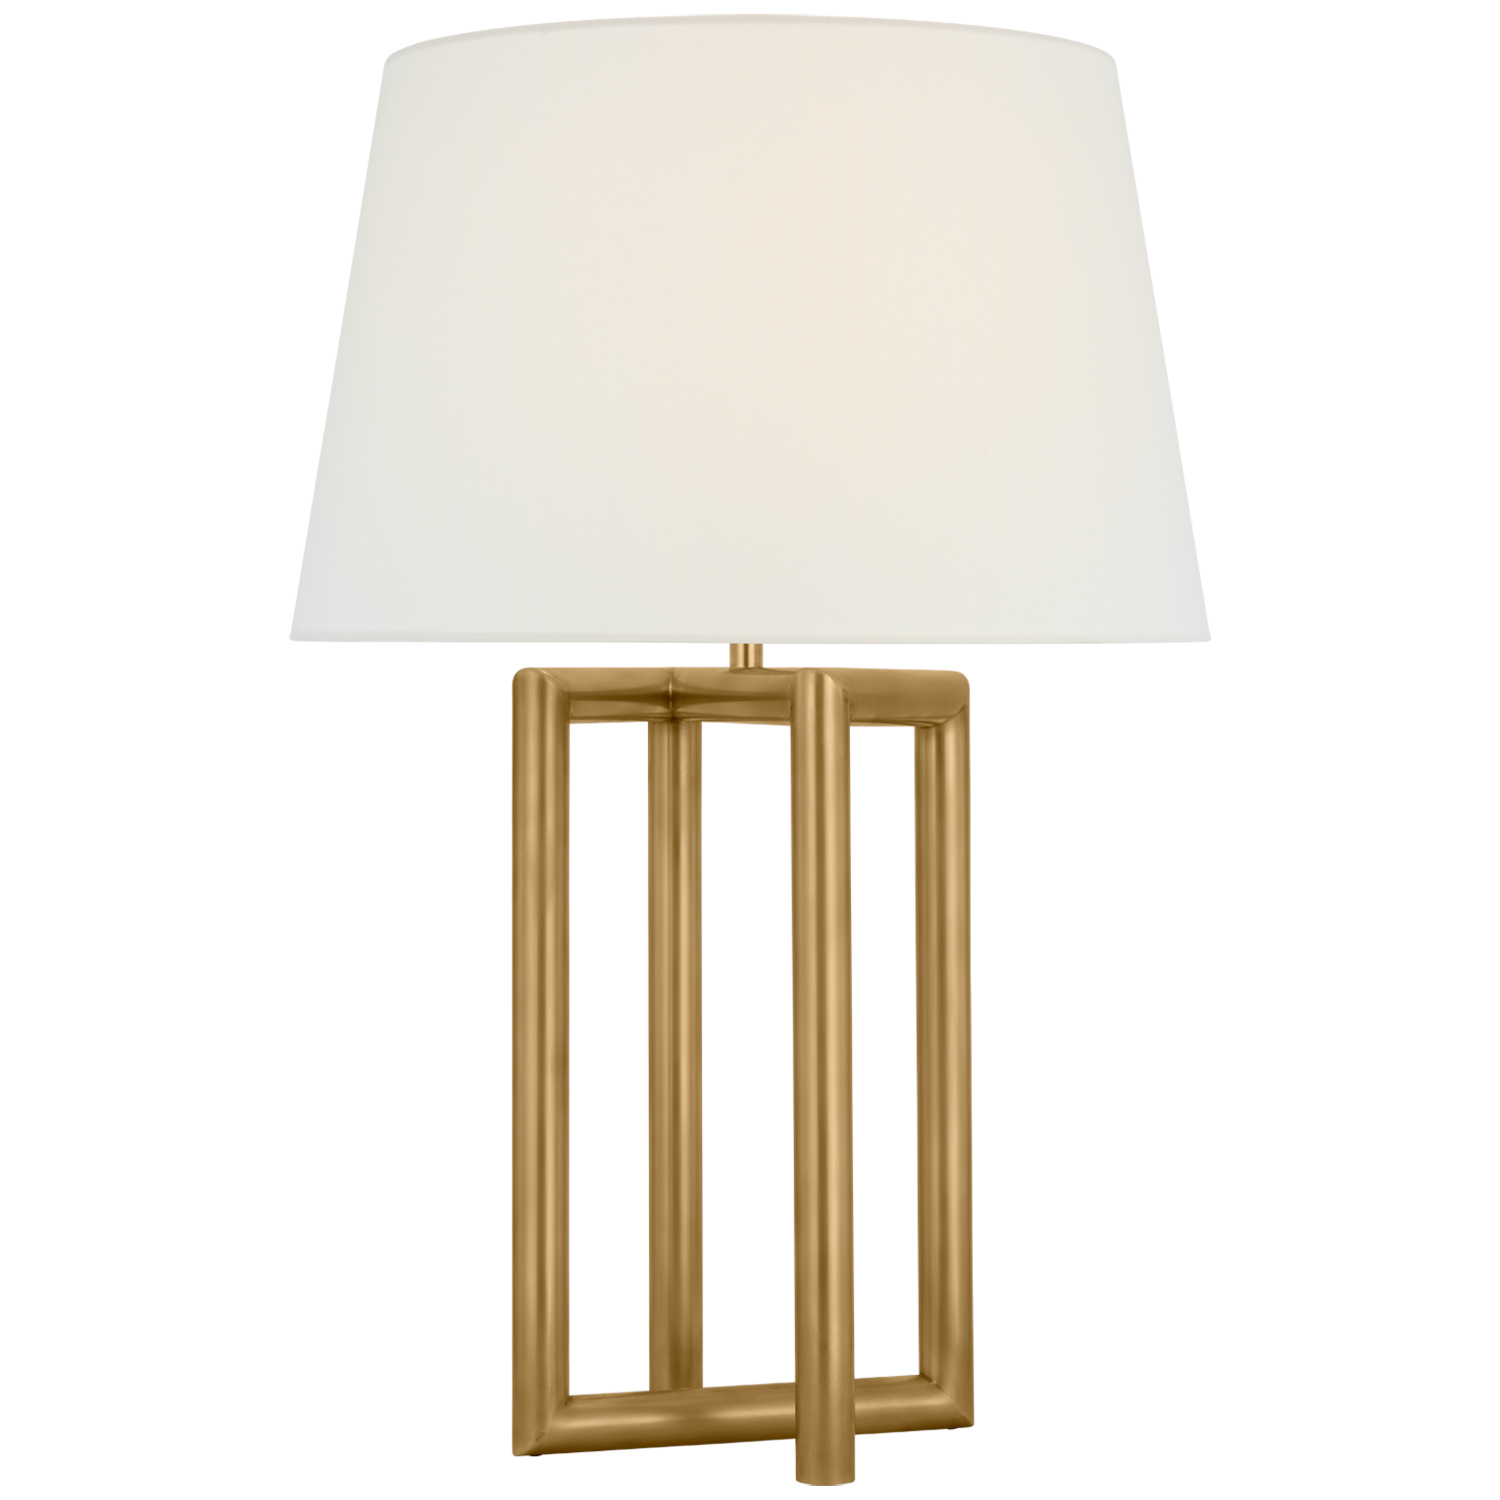 Concorde Table Lamp by Visual Comfort Signature, PCD 3170HAB-L